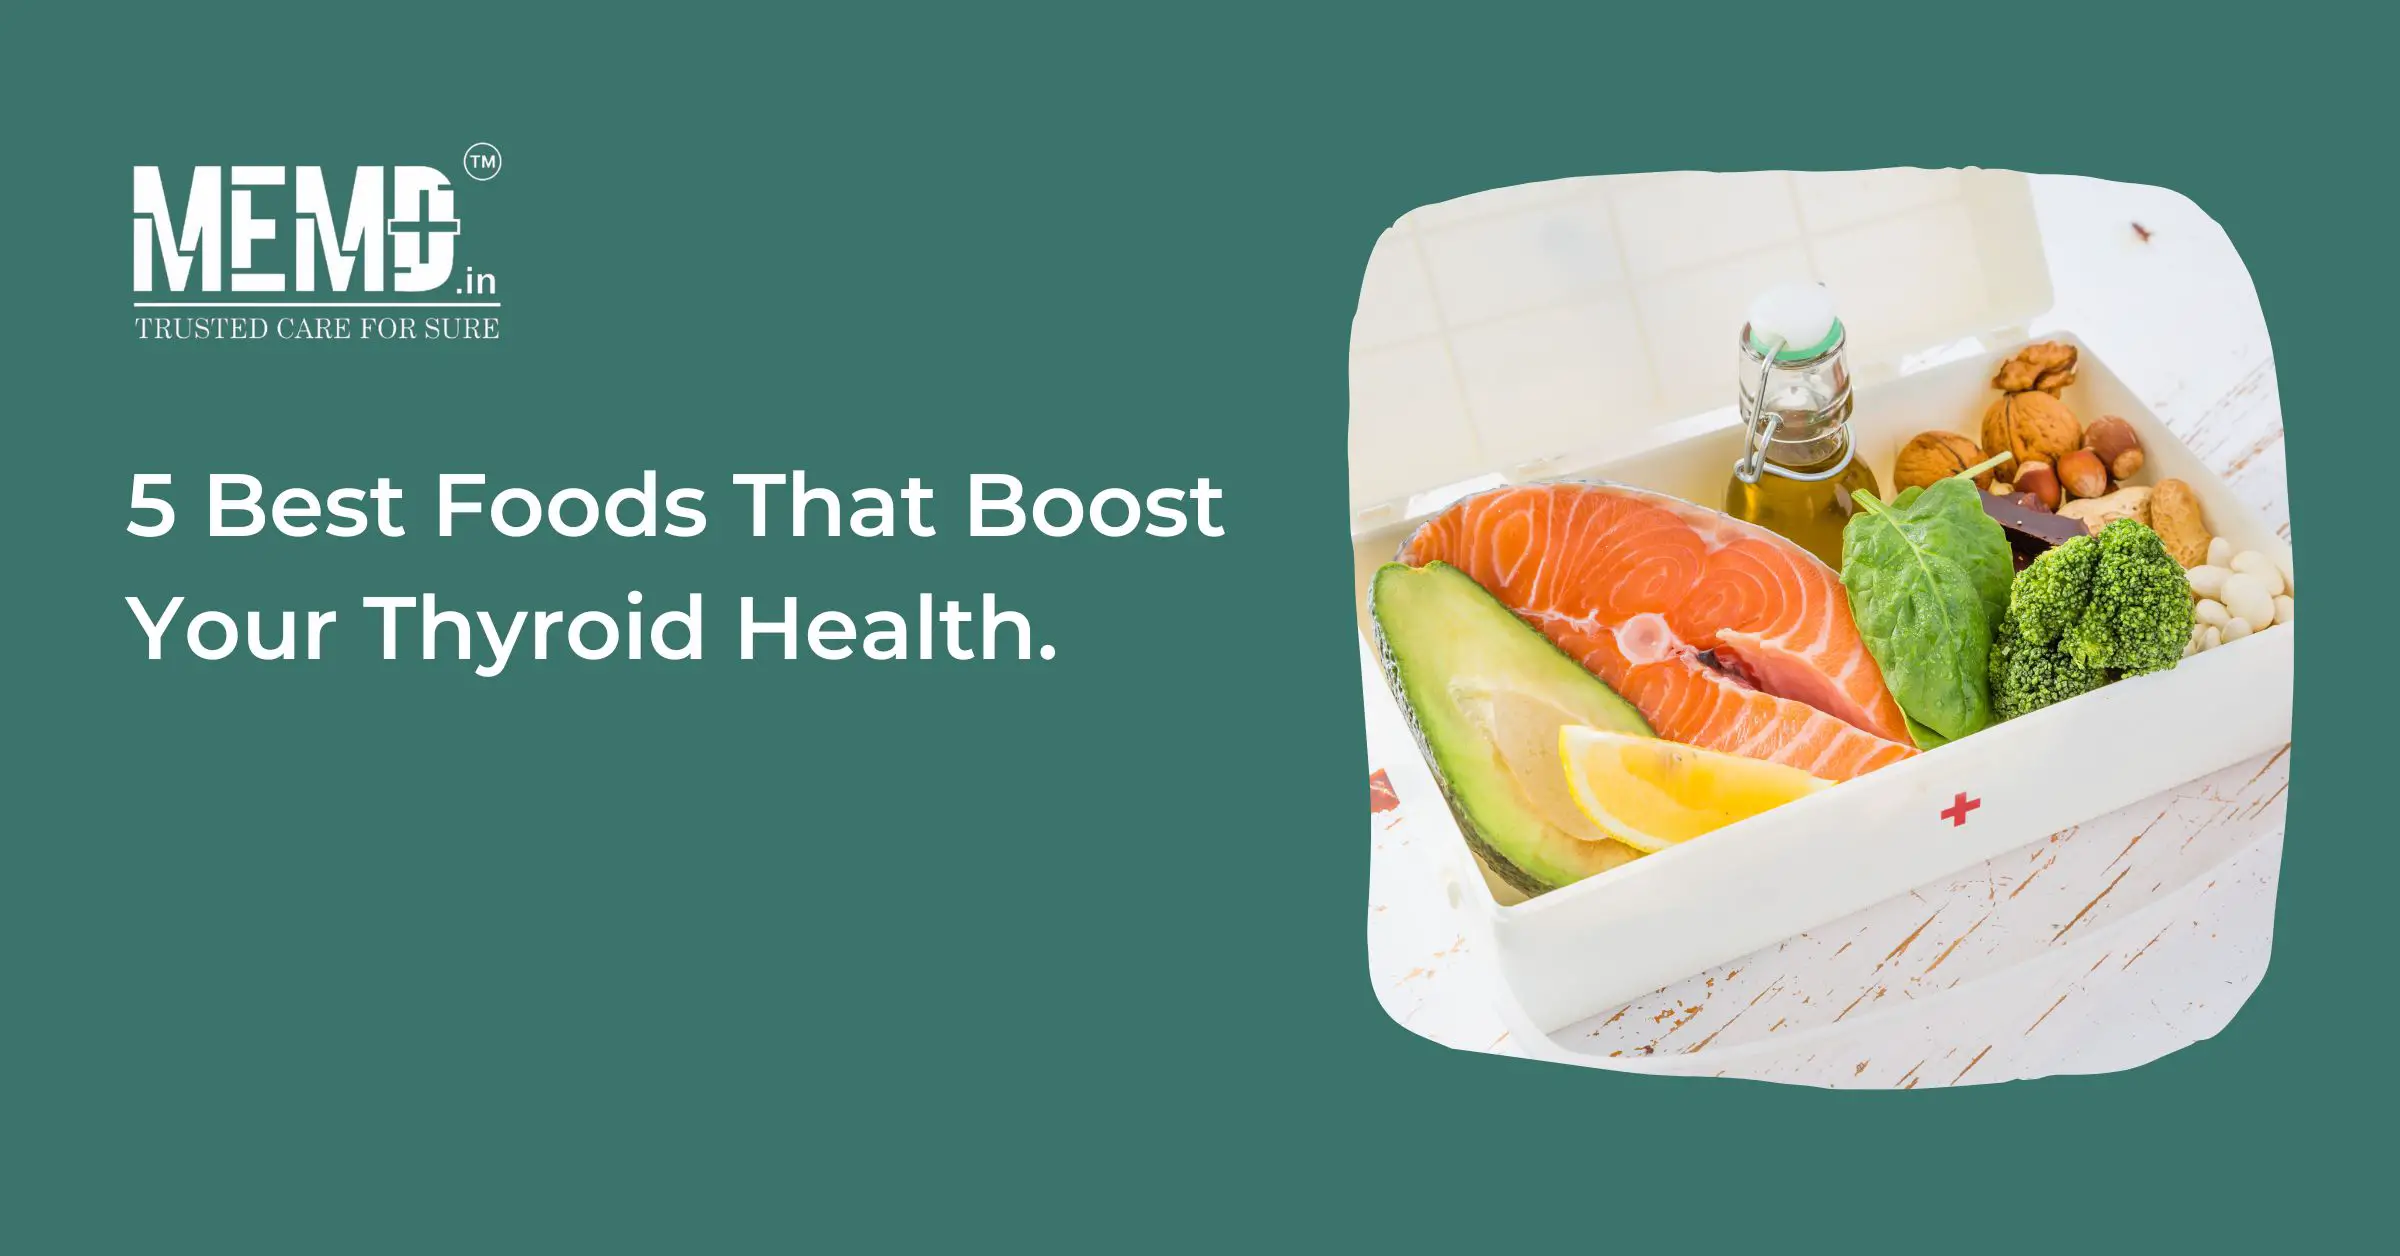 5 Best Foods That Boost Your Thyroid Health.